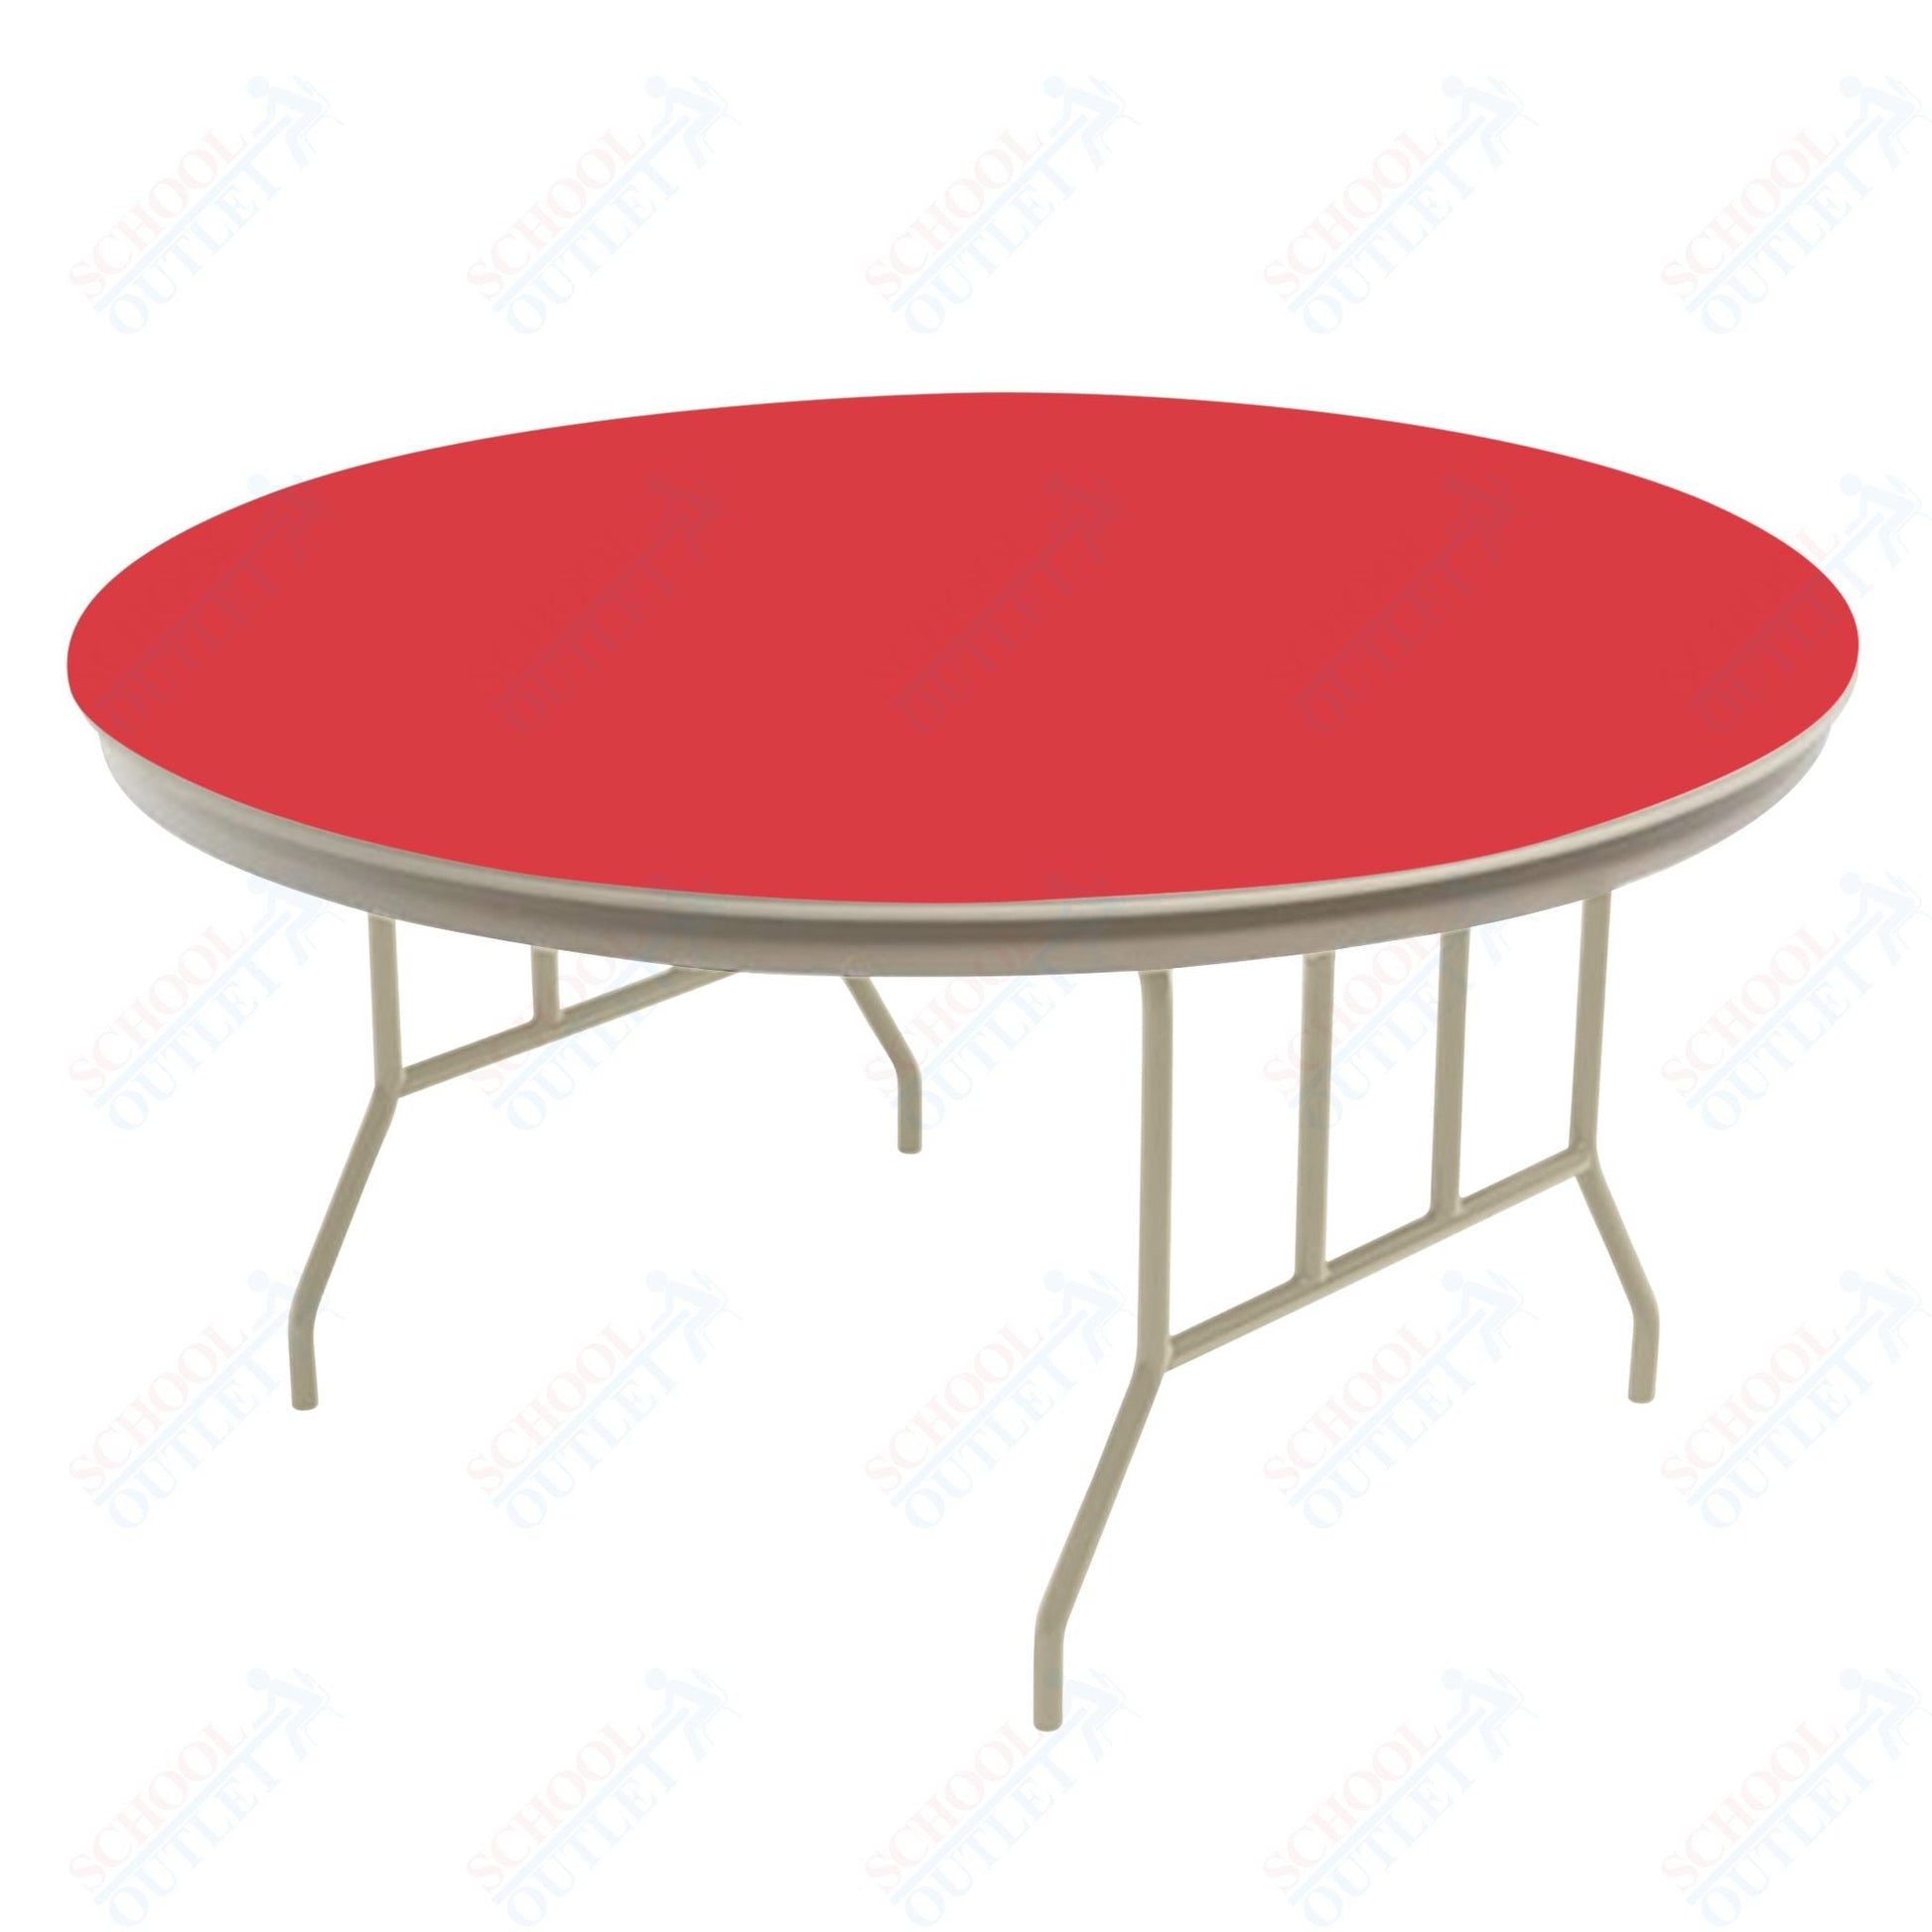 AmTab Dynalite Featherweight Heavy - Duty ABS Plastic Folding Table - Round - 36" Diameter x 29"H (AmTab AMT - R36DL) - SchoolOutlet